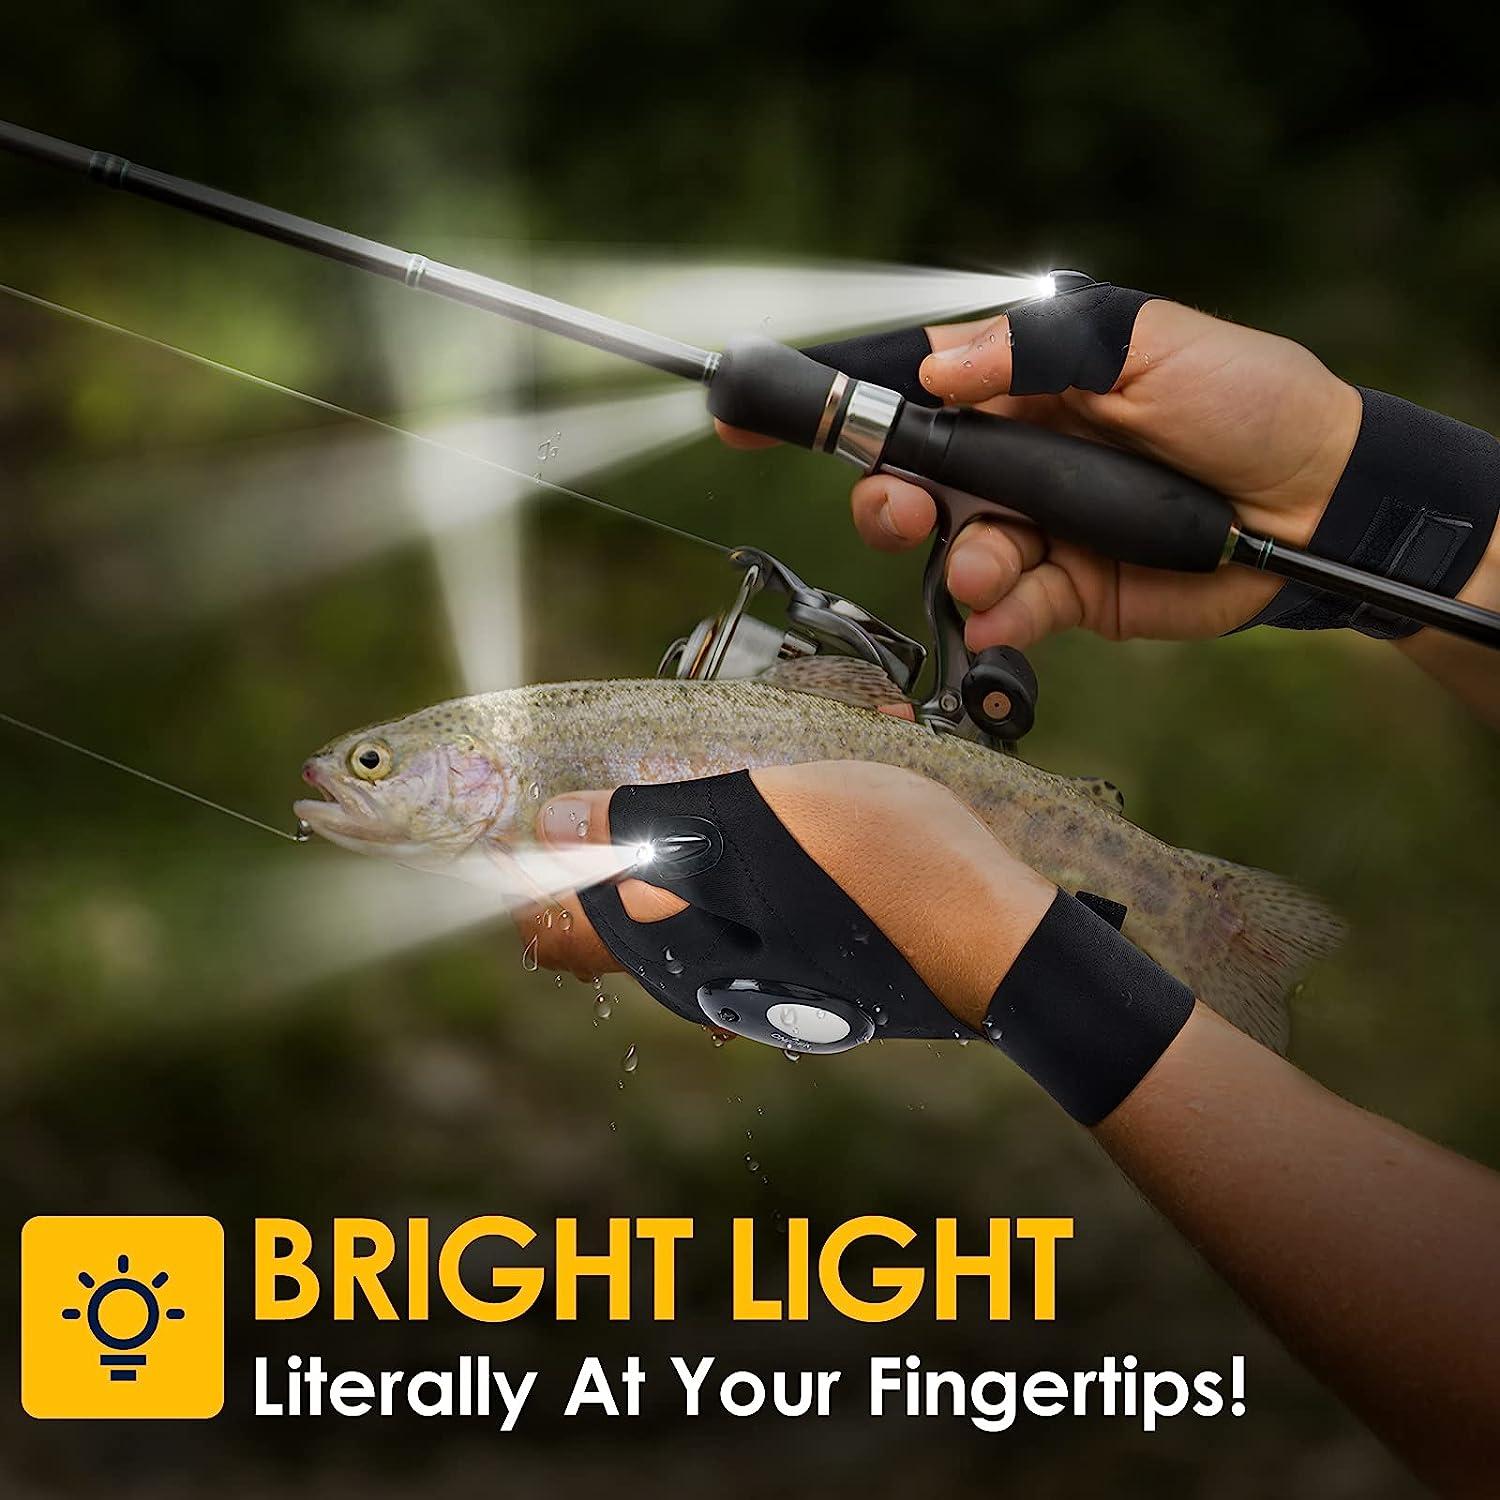 LED Flashlight Gloves Gifts for Men - Dad Gifts for Fathers Day Anniversary  Birthday Gifts for Him Boyfriend Husband Papa, Cool Gadgets Mechanic Tool  Car Guy Unique Stuff Fishing Hunting Camping Gift